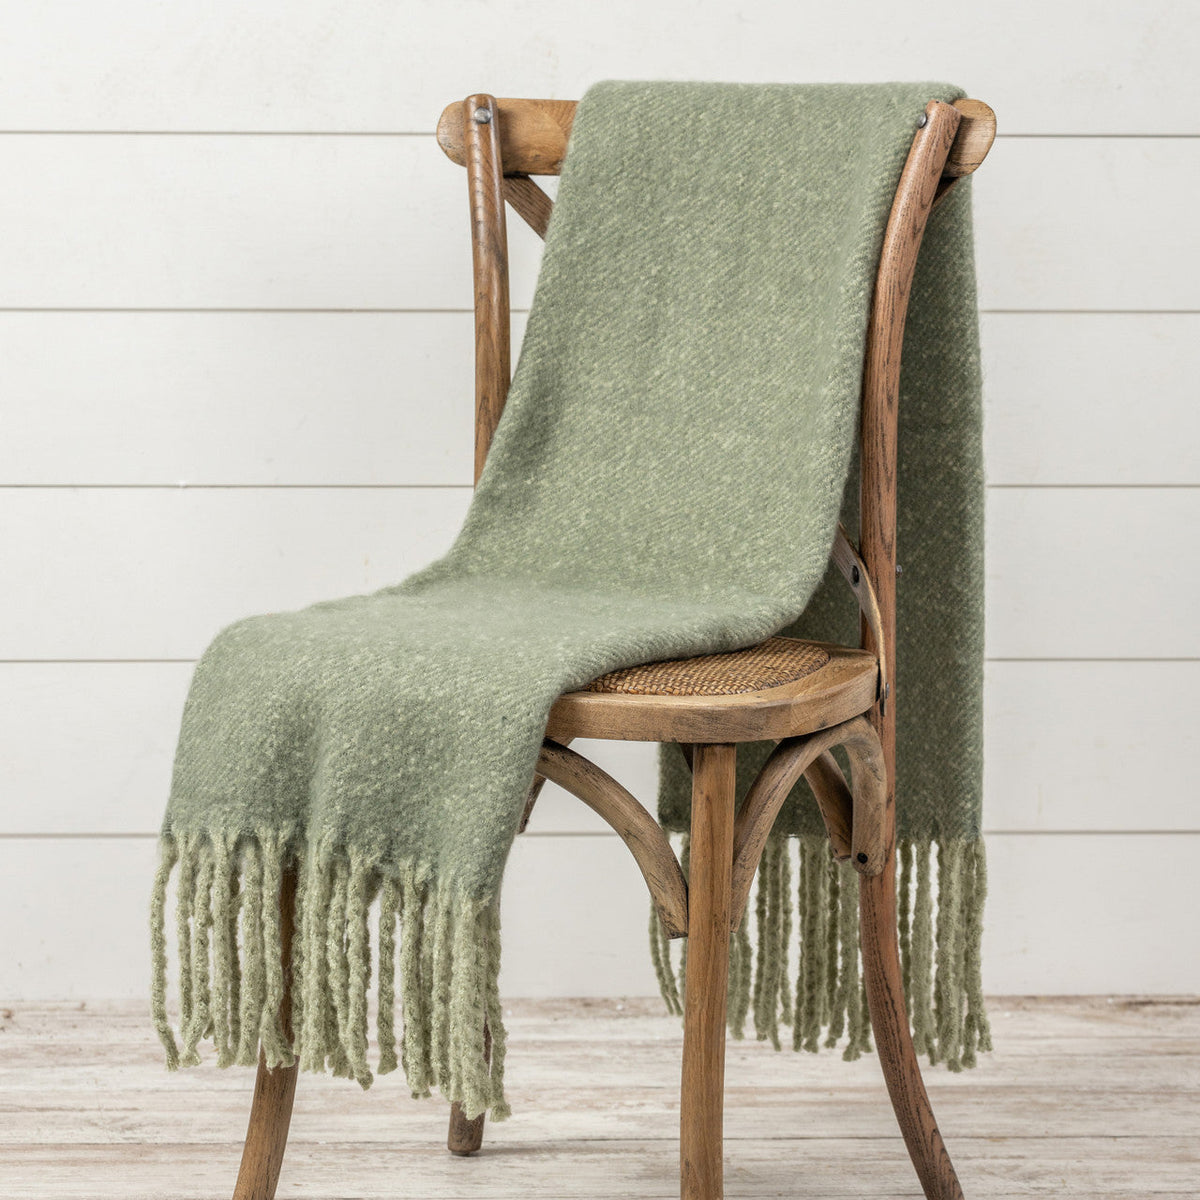 Heathered Green Throw With Tassels